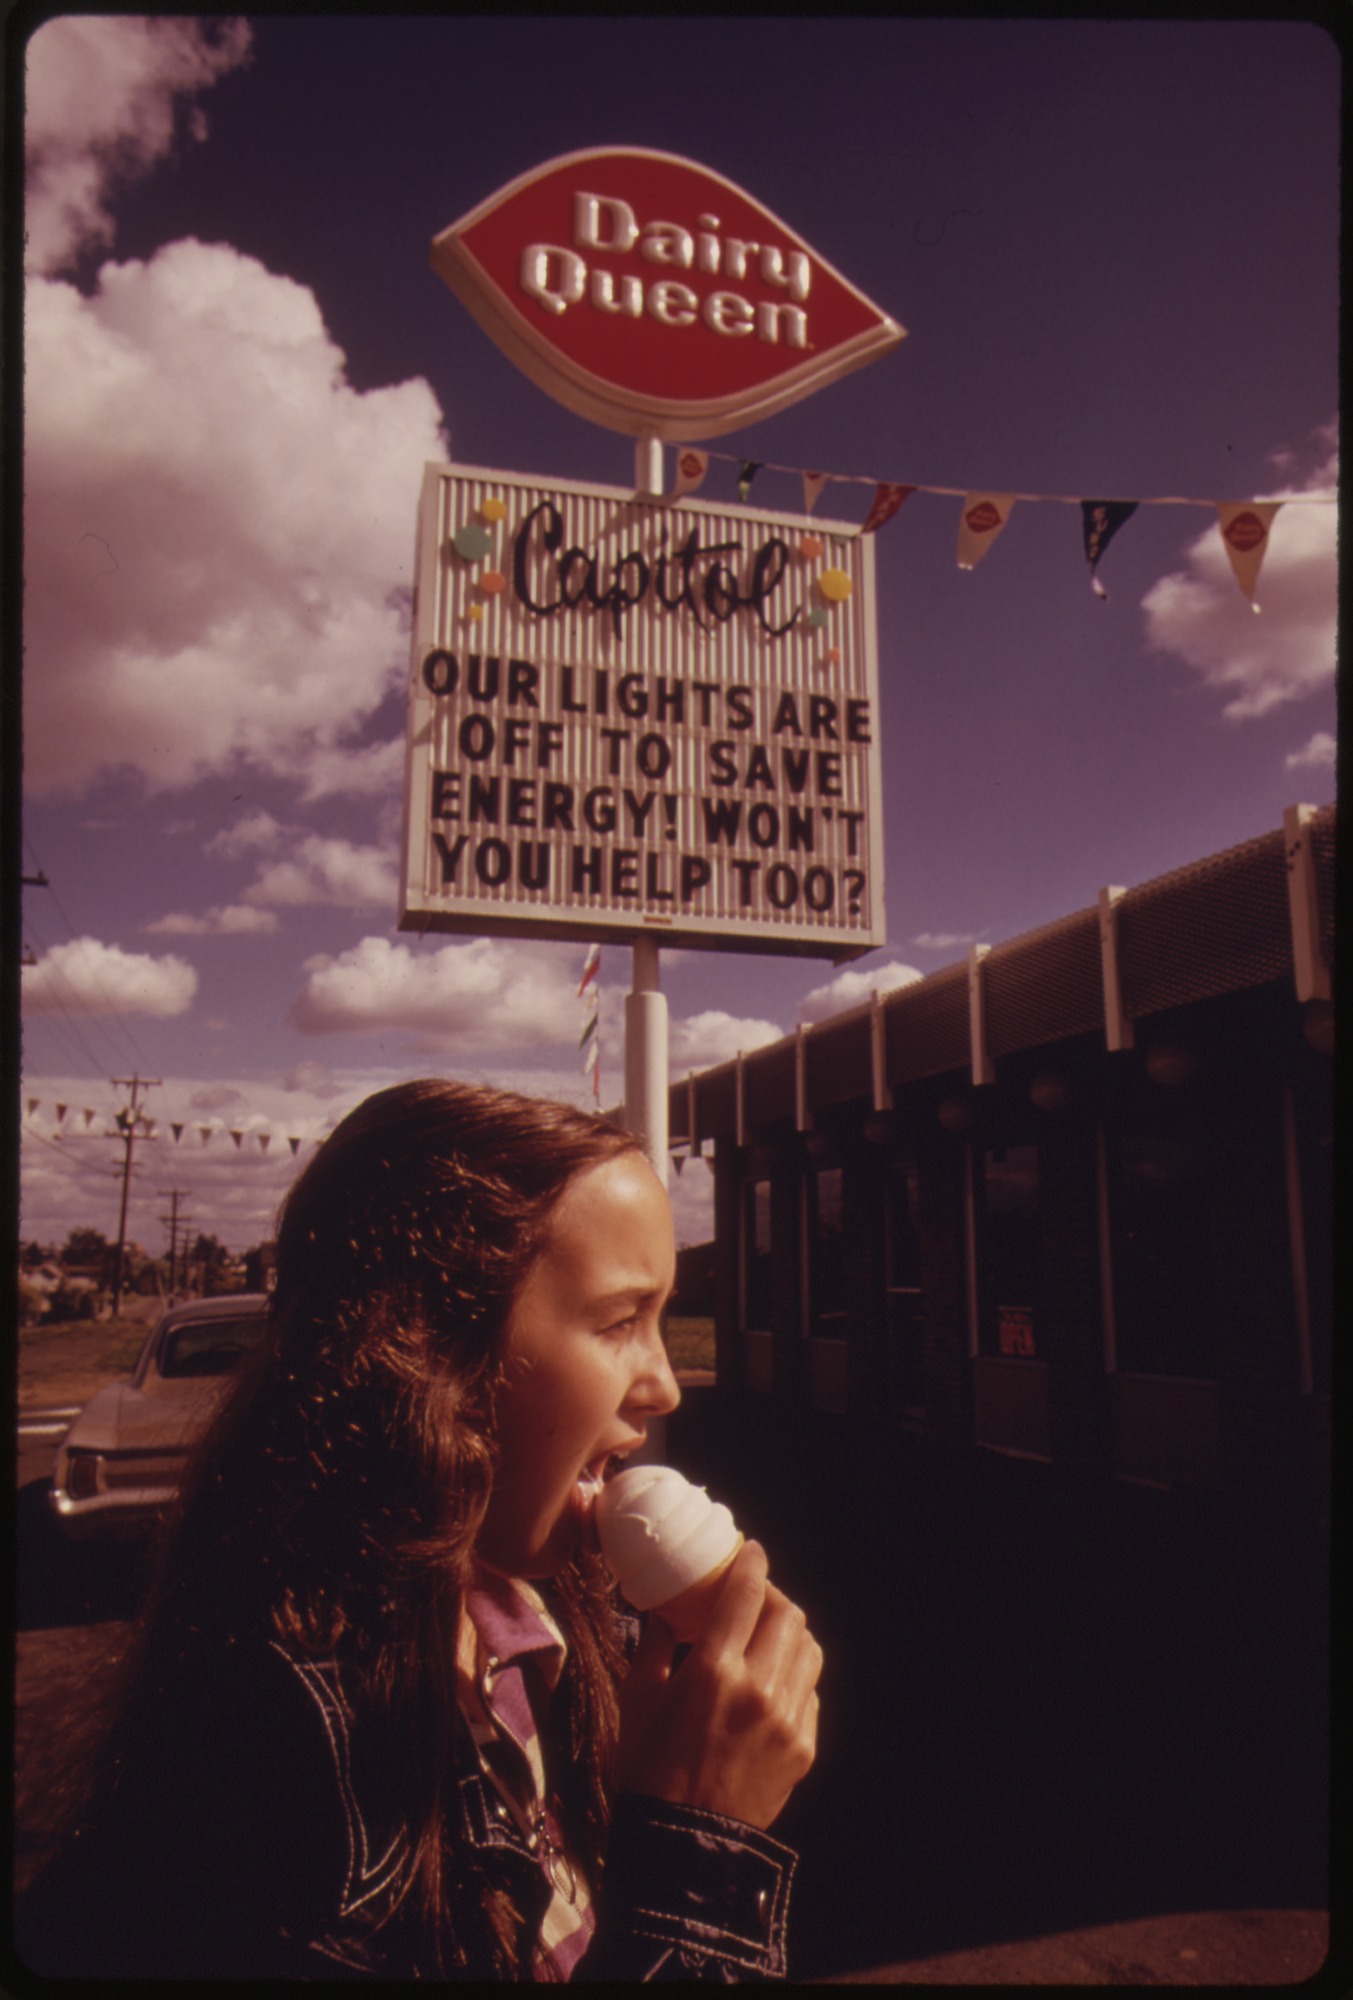 AFTER THE OREGON GOVERNOR BANNED NEON AND COMMERCIAL LIGHTING DISPLAYS, FIRMS USED THEIR UNLIT SIGNS TO CONVEY ENERGY... - NARA - 555390